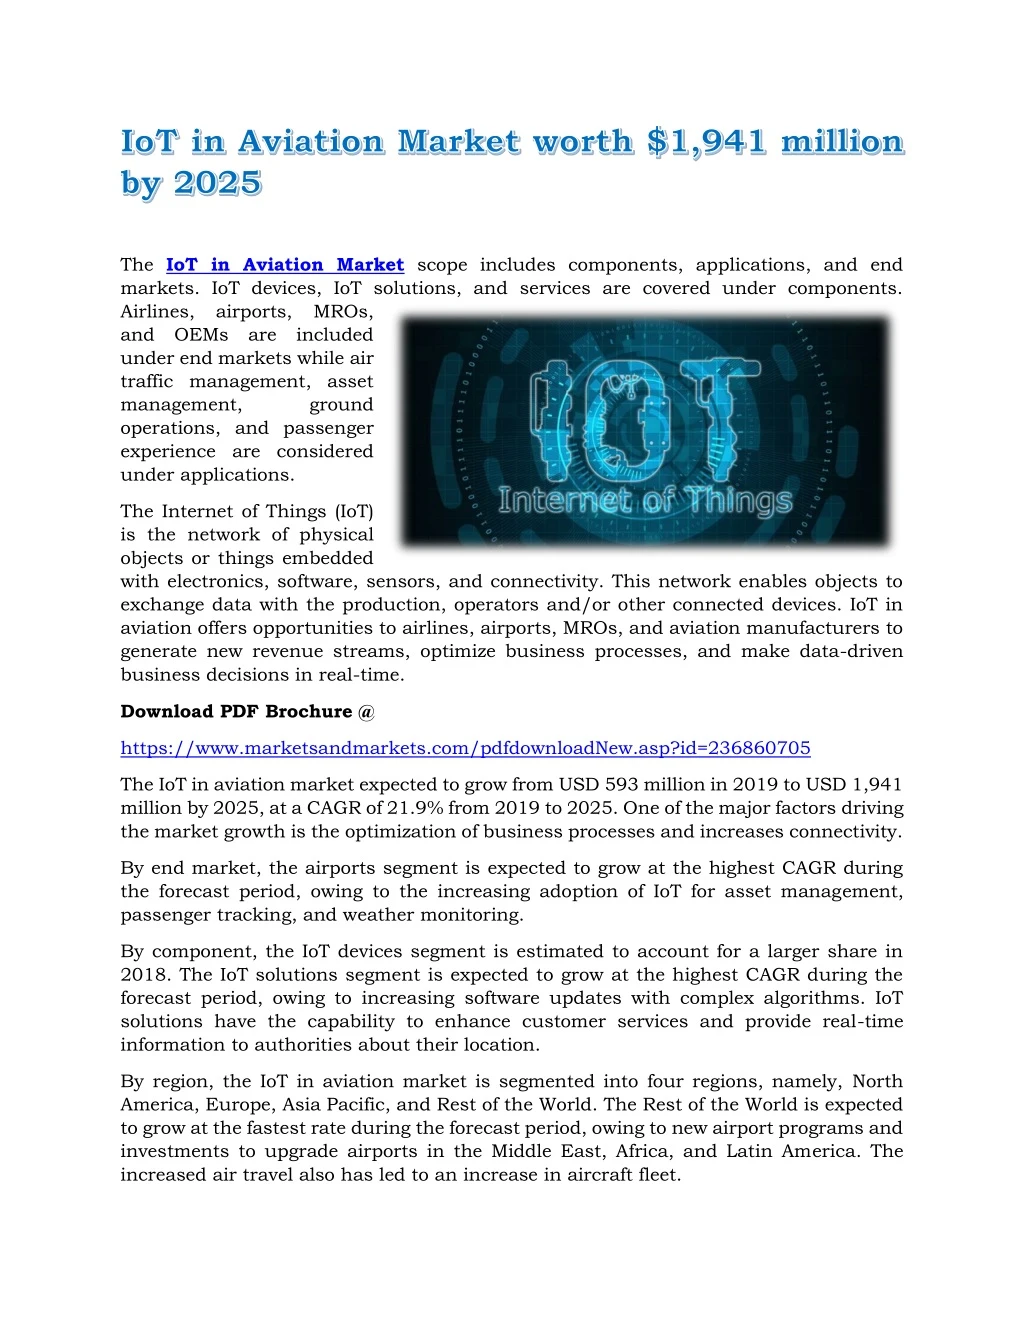 the iot in aviation market scope includes